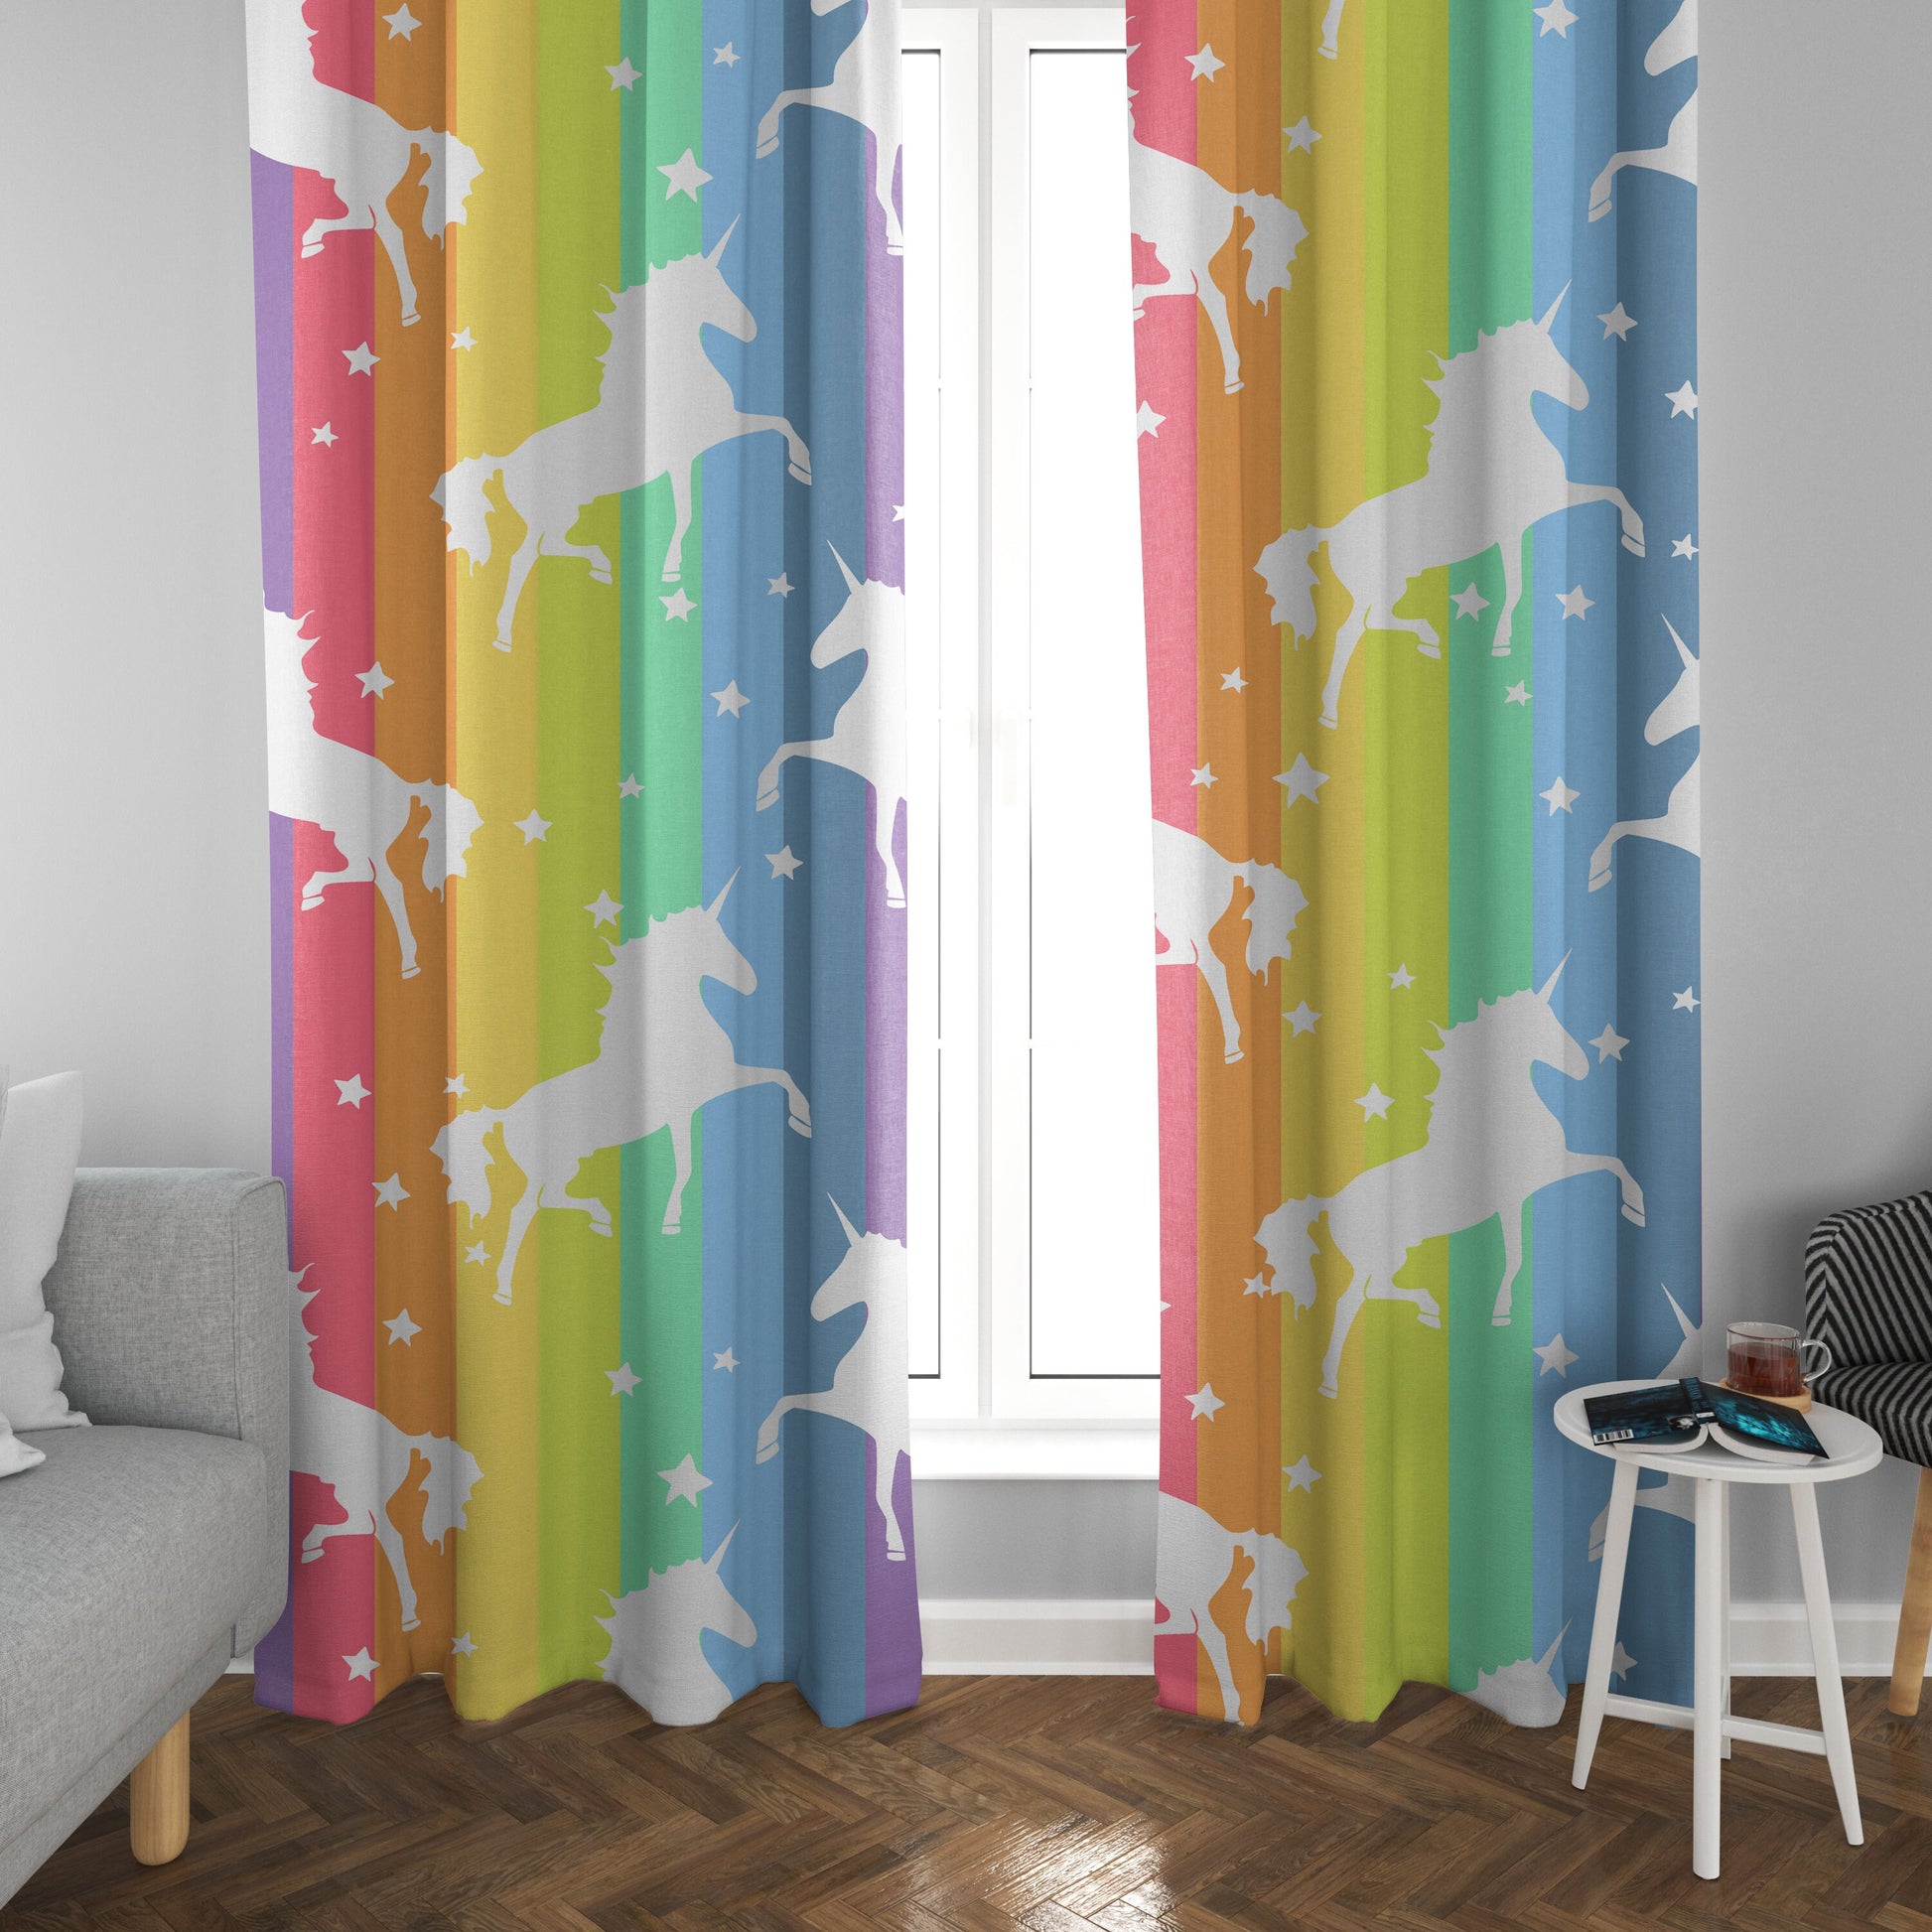 Rainbow Unicorn Blackout Window Curtains Double Panels Each Panel 50"Wx73"H (Total Width of 100")